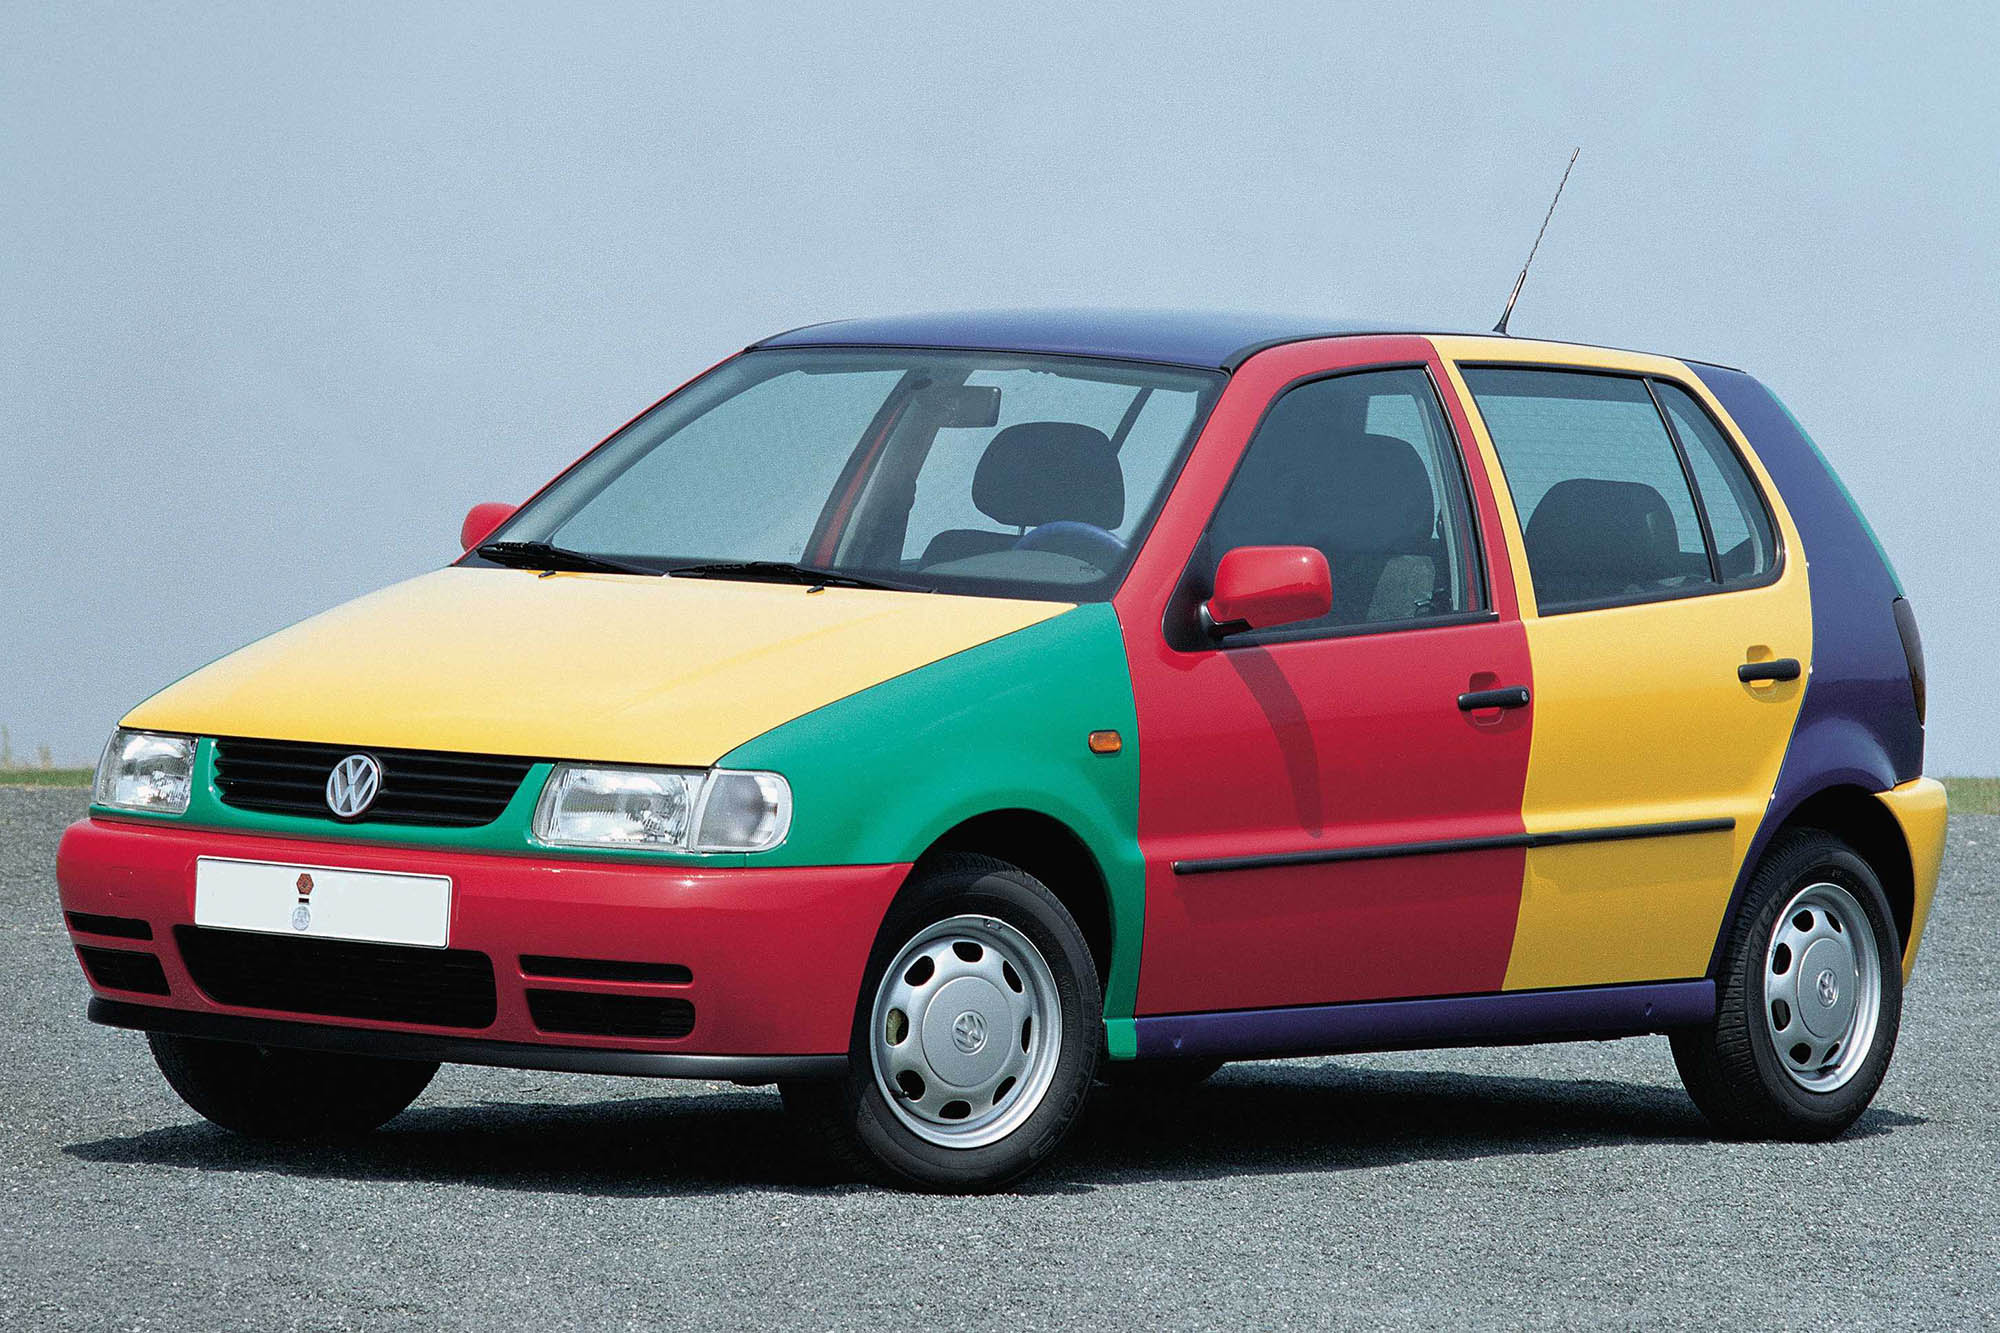 1995 Volkswagen Polo with the Harlequin paint job